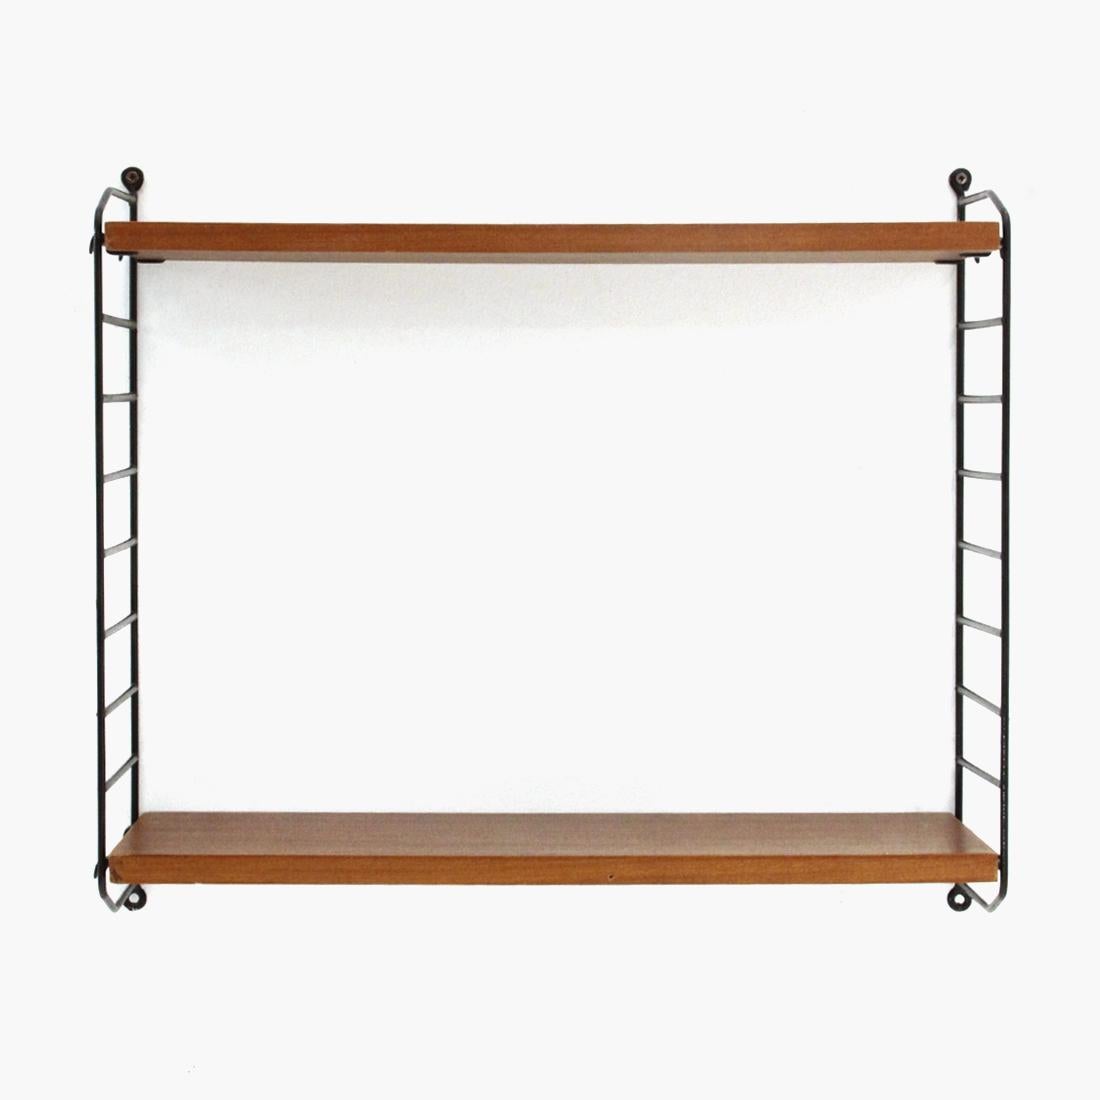 Italian-made hanging bookcase produced in the 1960s.
Side uprights in black plastic metal.
Two shelves in teak veneered wood.
Good general condition, some signs on the shelves due to normal use over time.

Dimensions: Length 59 cm, depth 20 cm,